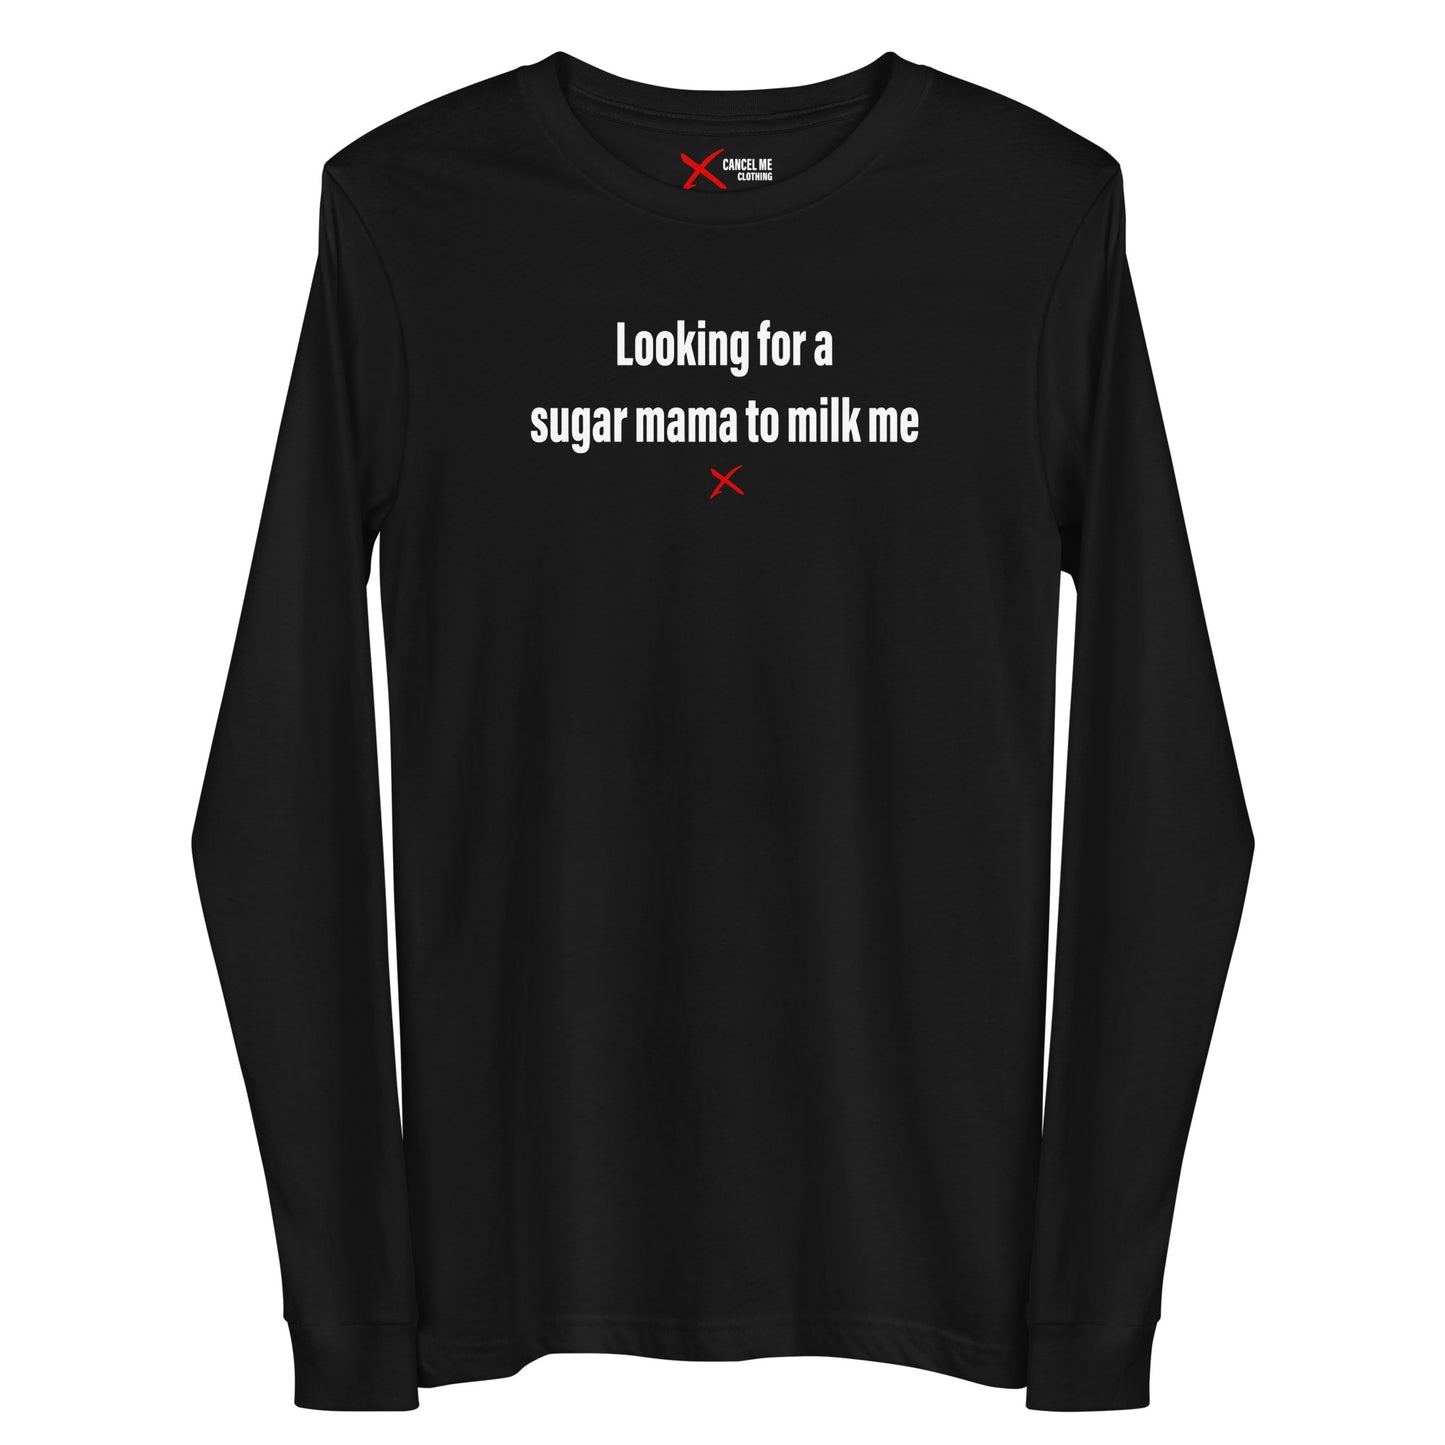 Looking for a sugar mama to milk me - Longsleeve